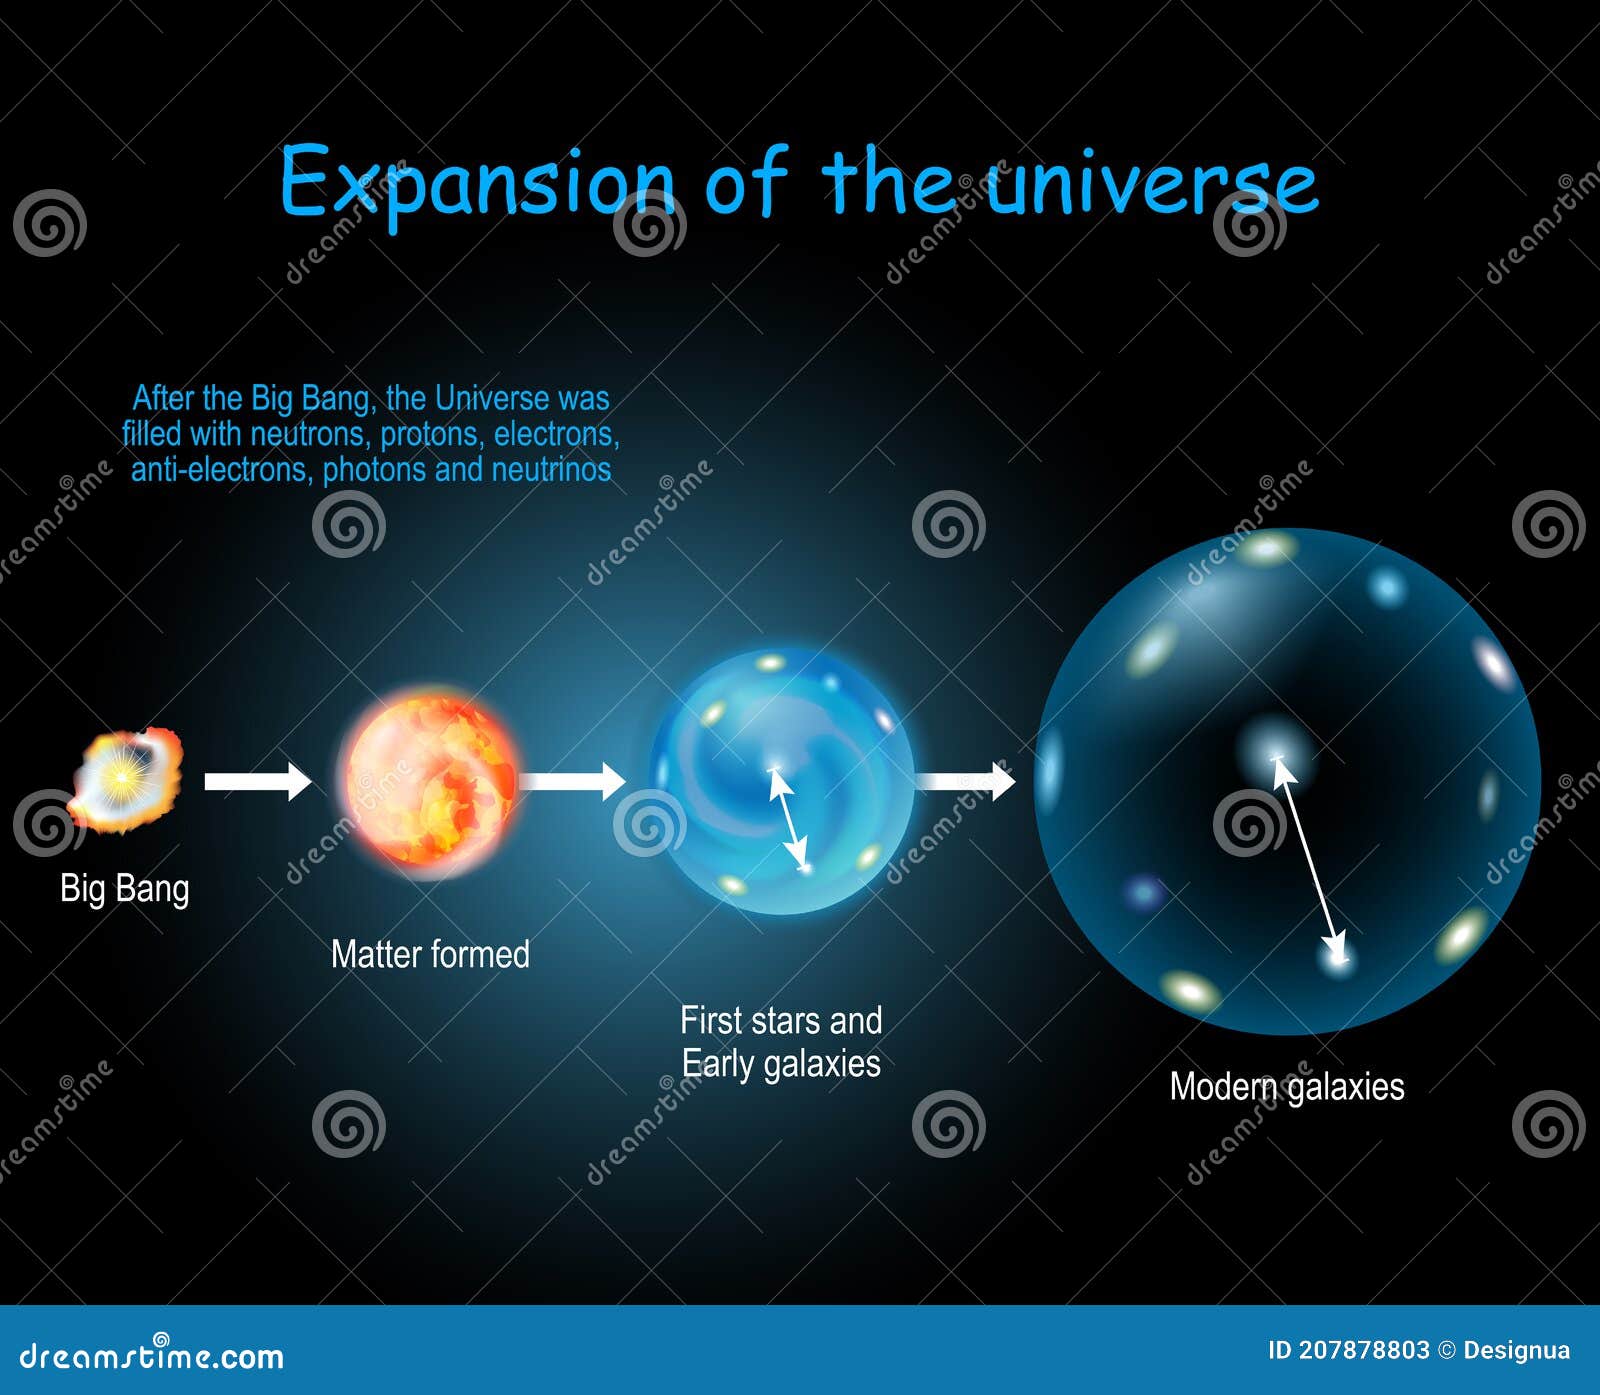 Expansion and Evolution of the Universe. Physical Cosmology, and